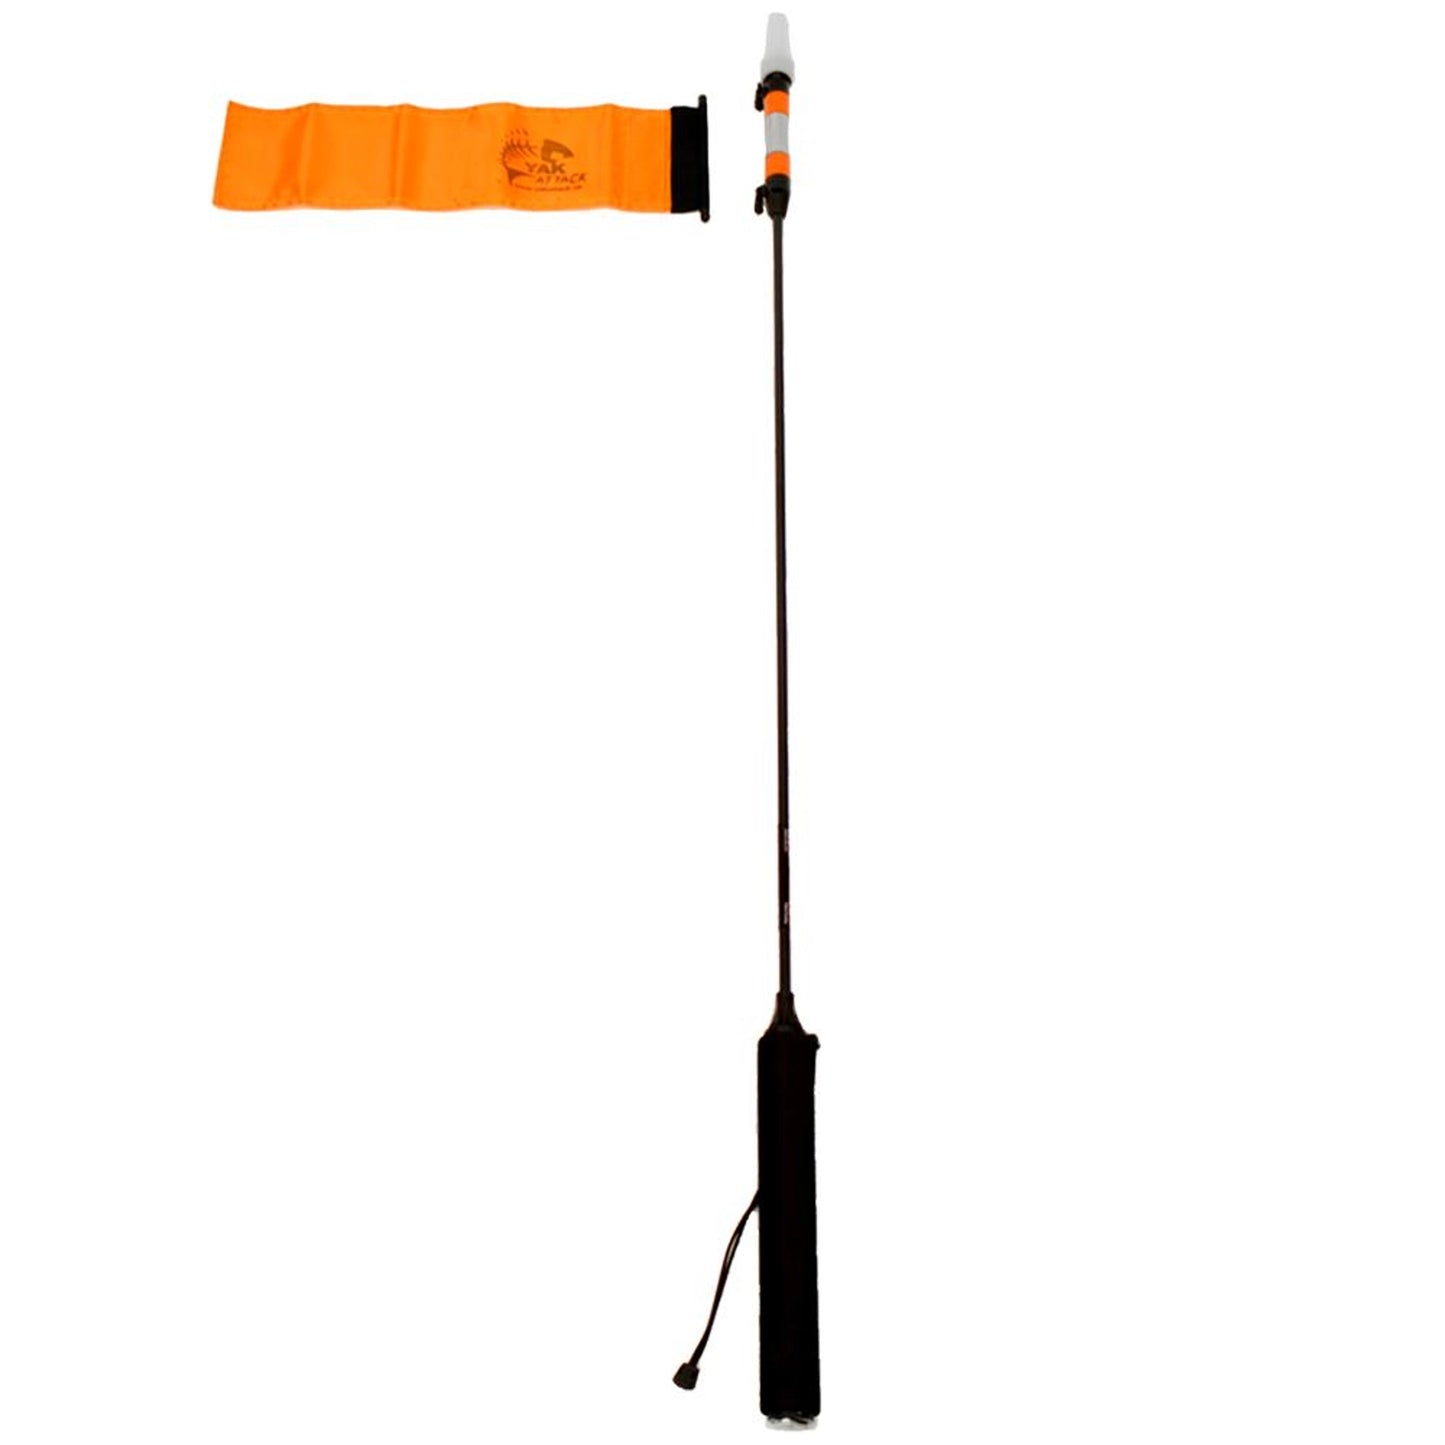 YakAttack VISIpole II, Mighty Mount / GearTrac Ready, Includes Flag